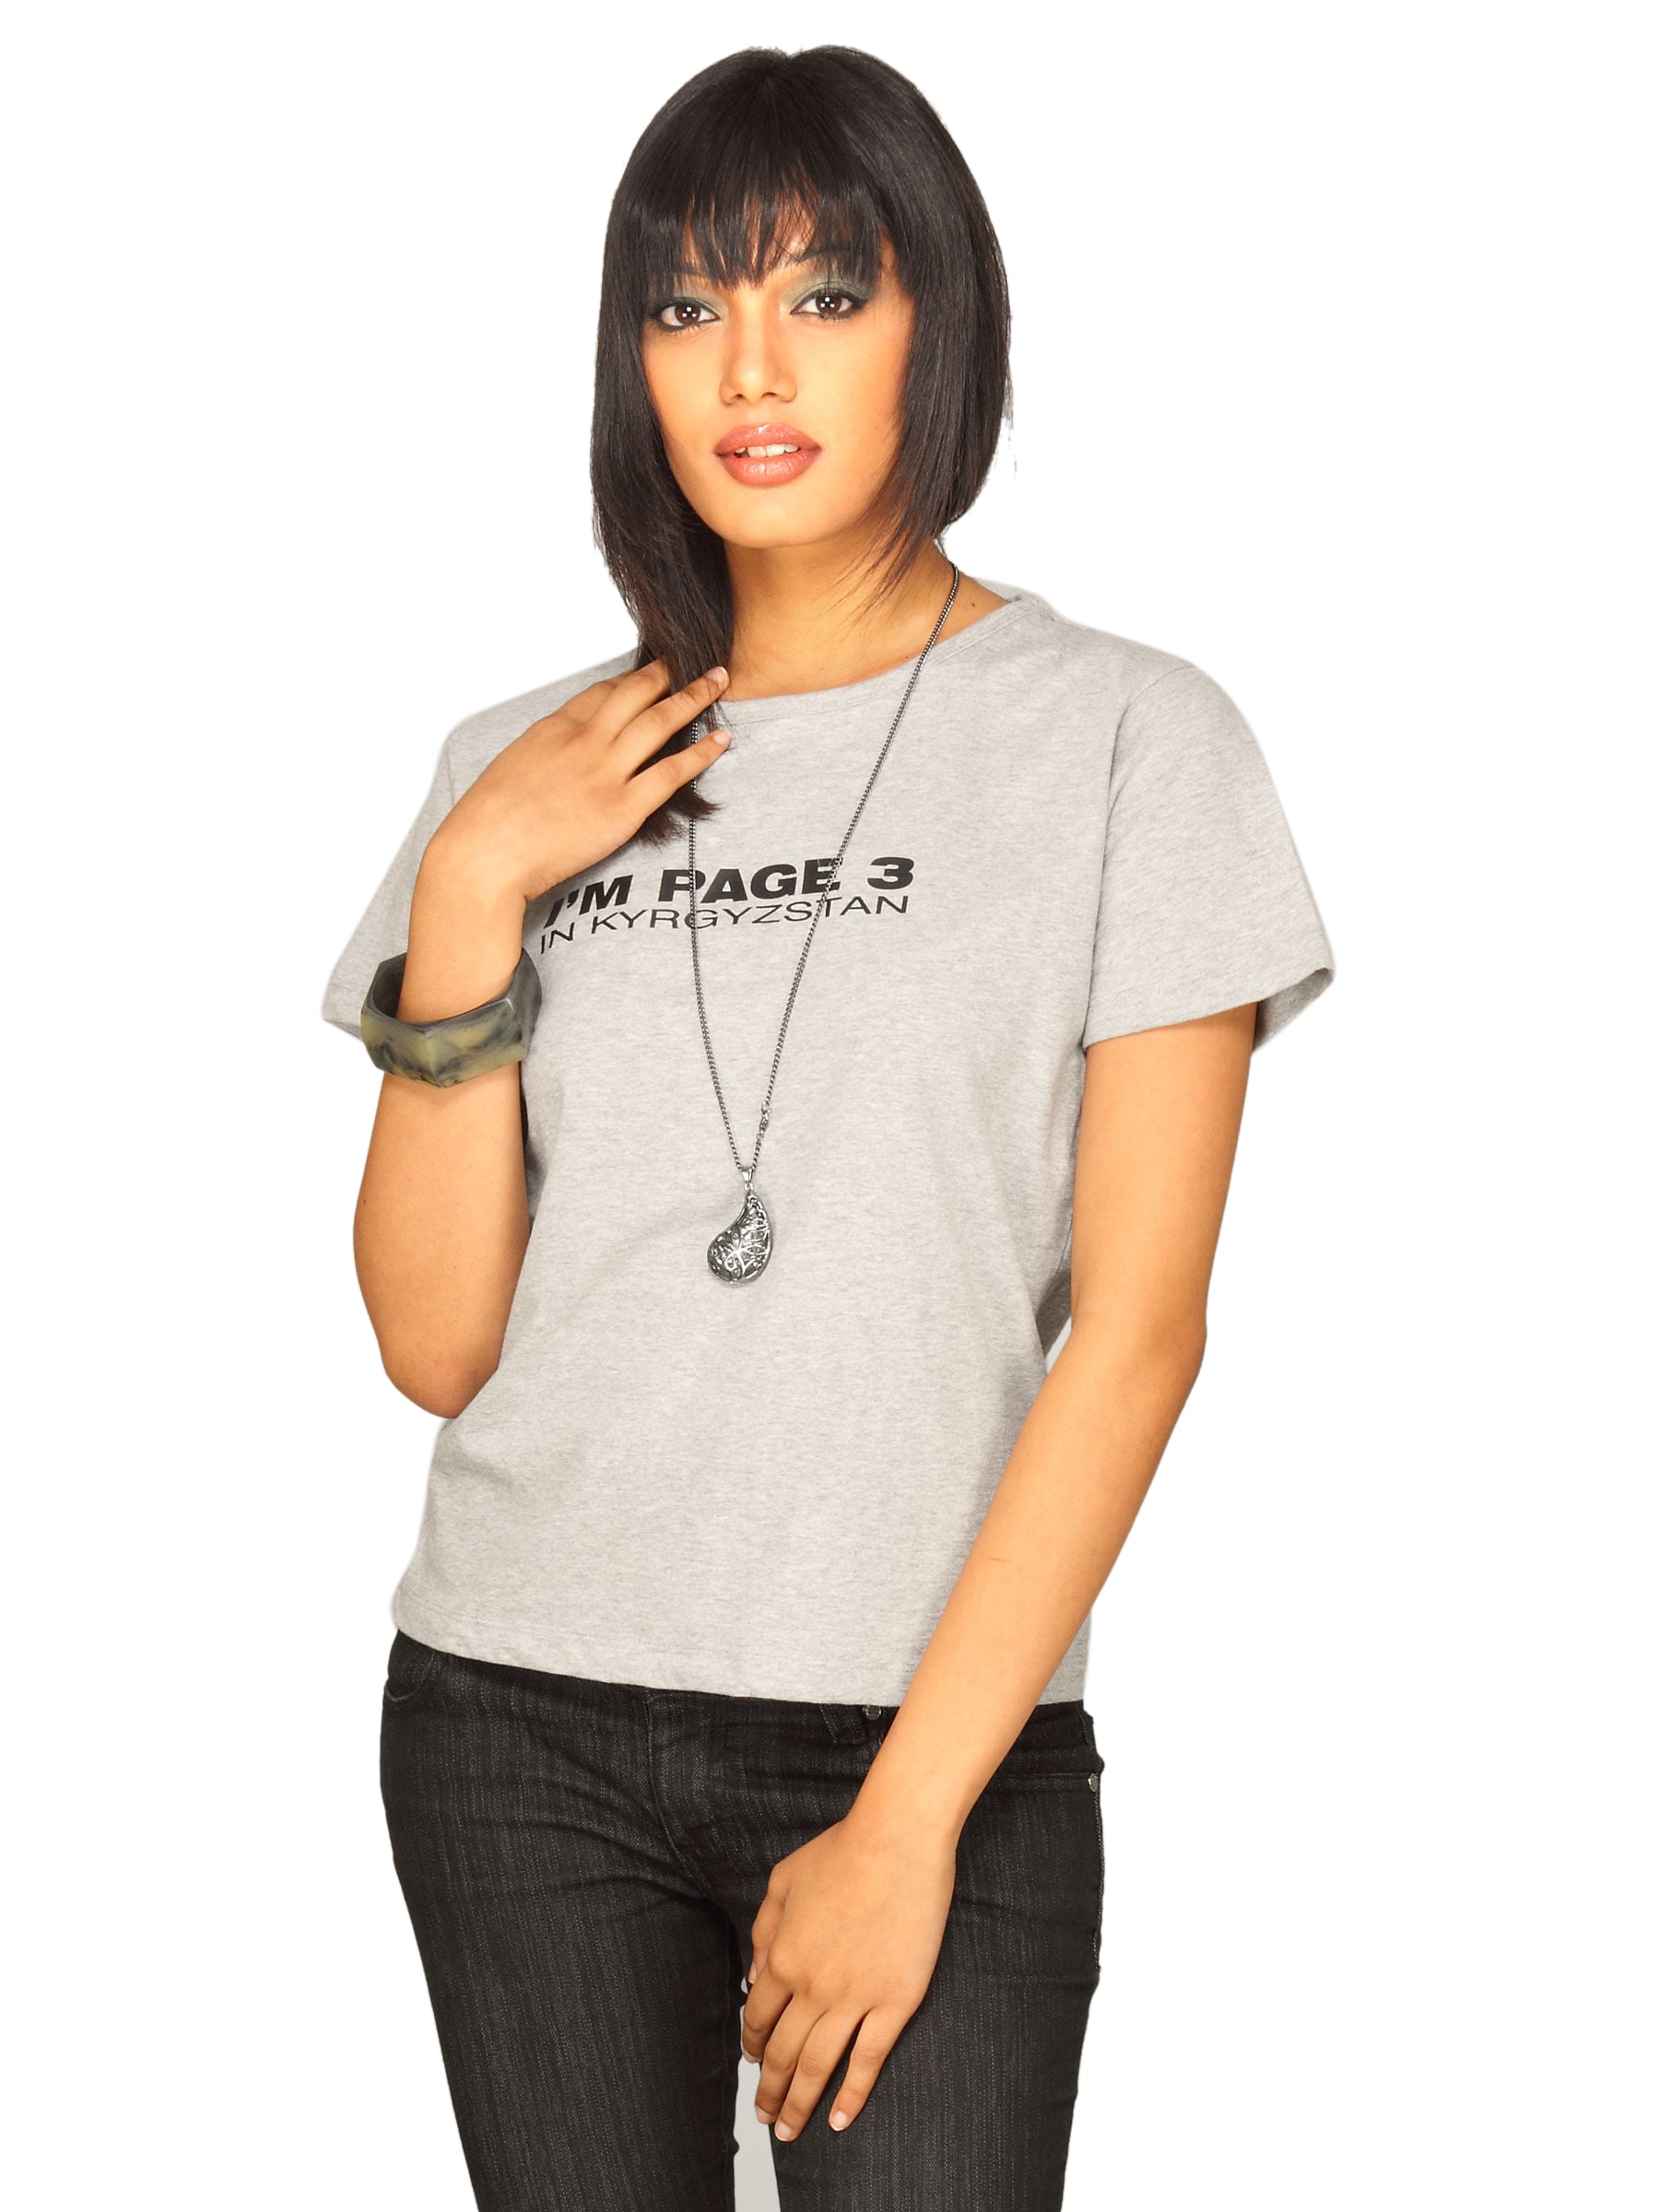 Tantra Women's Page 03 Grey T-shirt